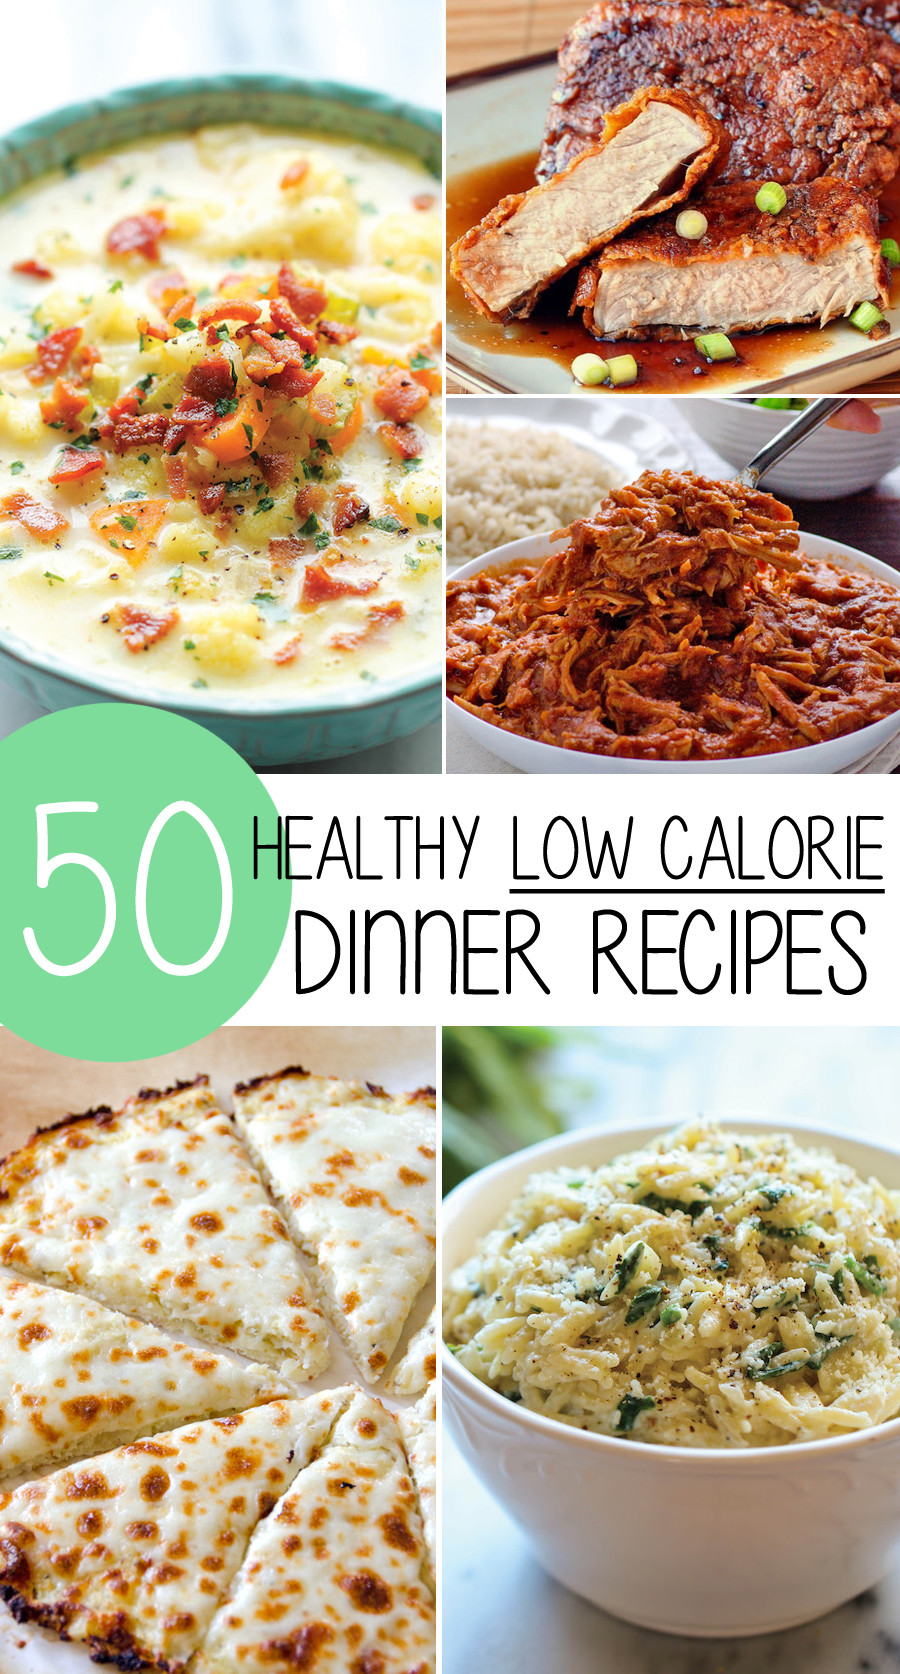 Very Low Calorie Recipes
 50 Healthy Low Calorie Weight Loss Dinner Recipes